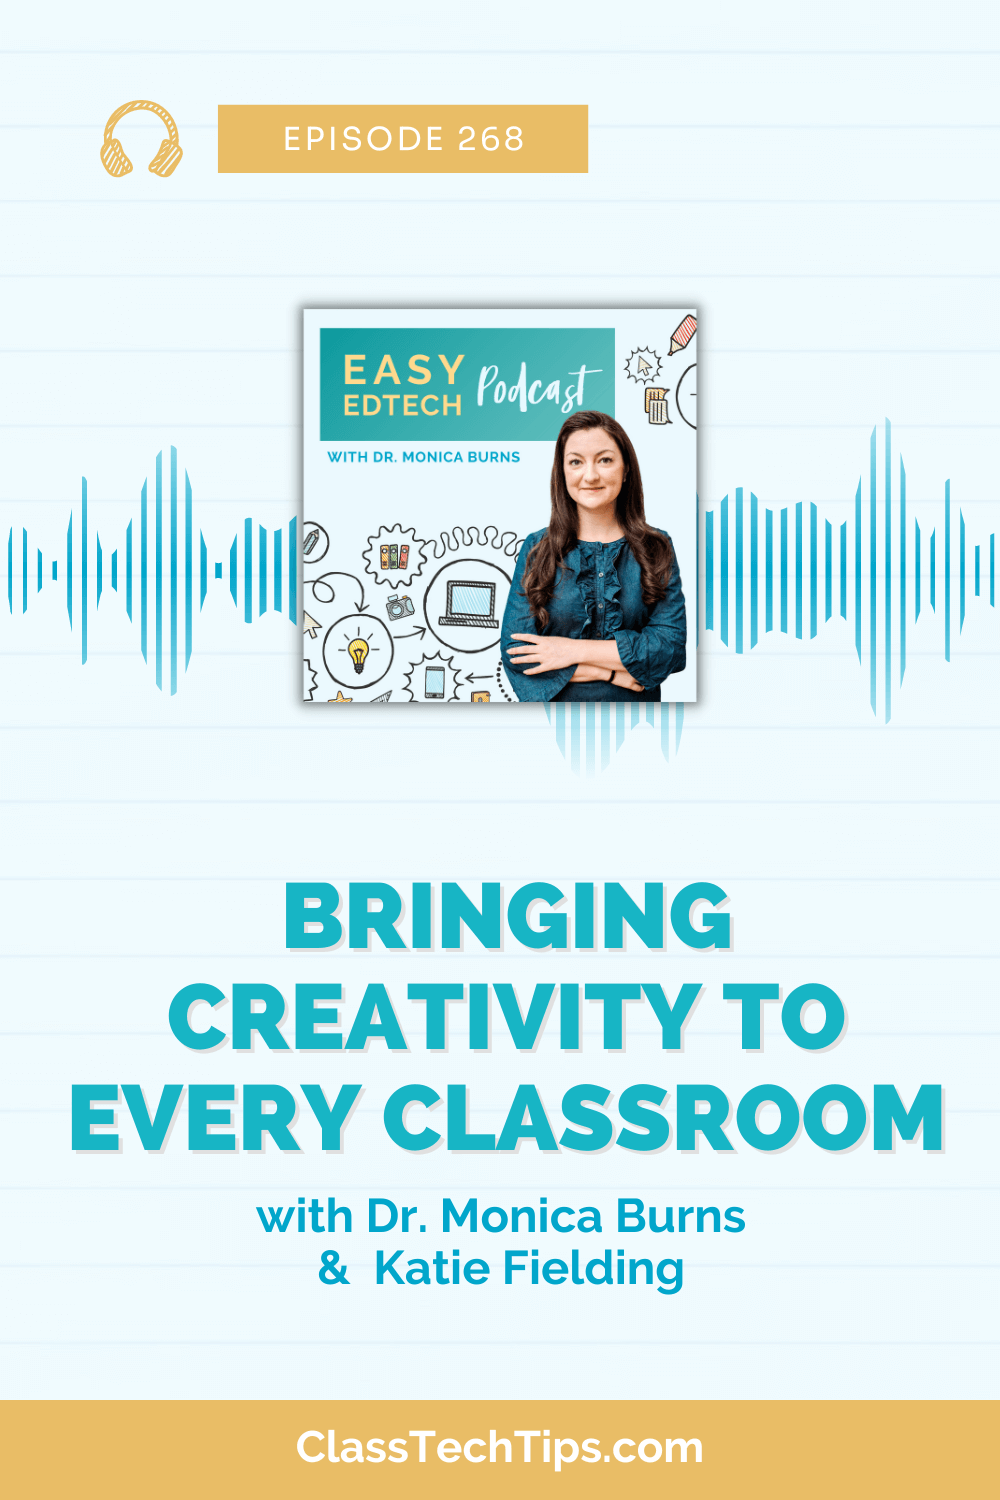 Easy EdTech Podcast Episode 268, titled "Bringing Creativity to Every Classroom," features Dr. Monica Burns and Katie Fielding. The image includes Dr. Monica Burns, sound wave graphics, and technology icons, promoting innovative teaching strategies to enhance creativity in classrooms. Available on ClassTechTips.com.